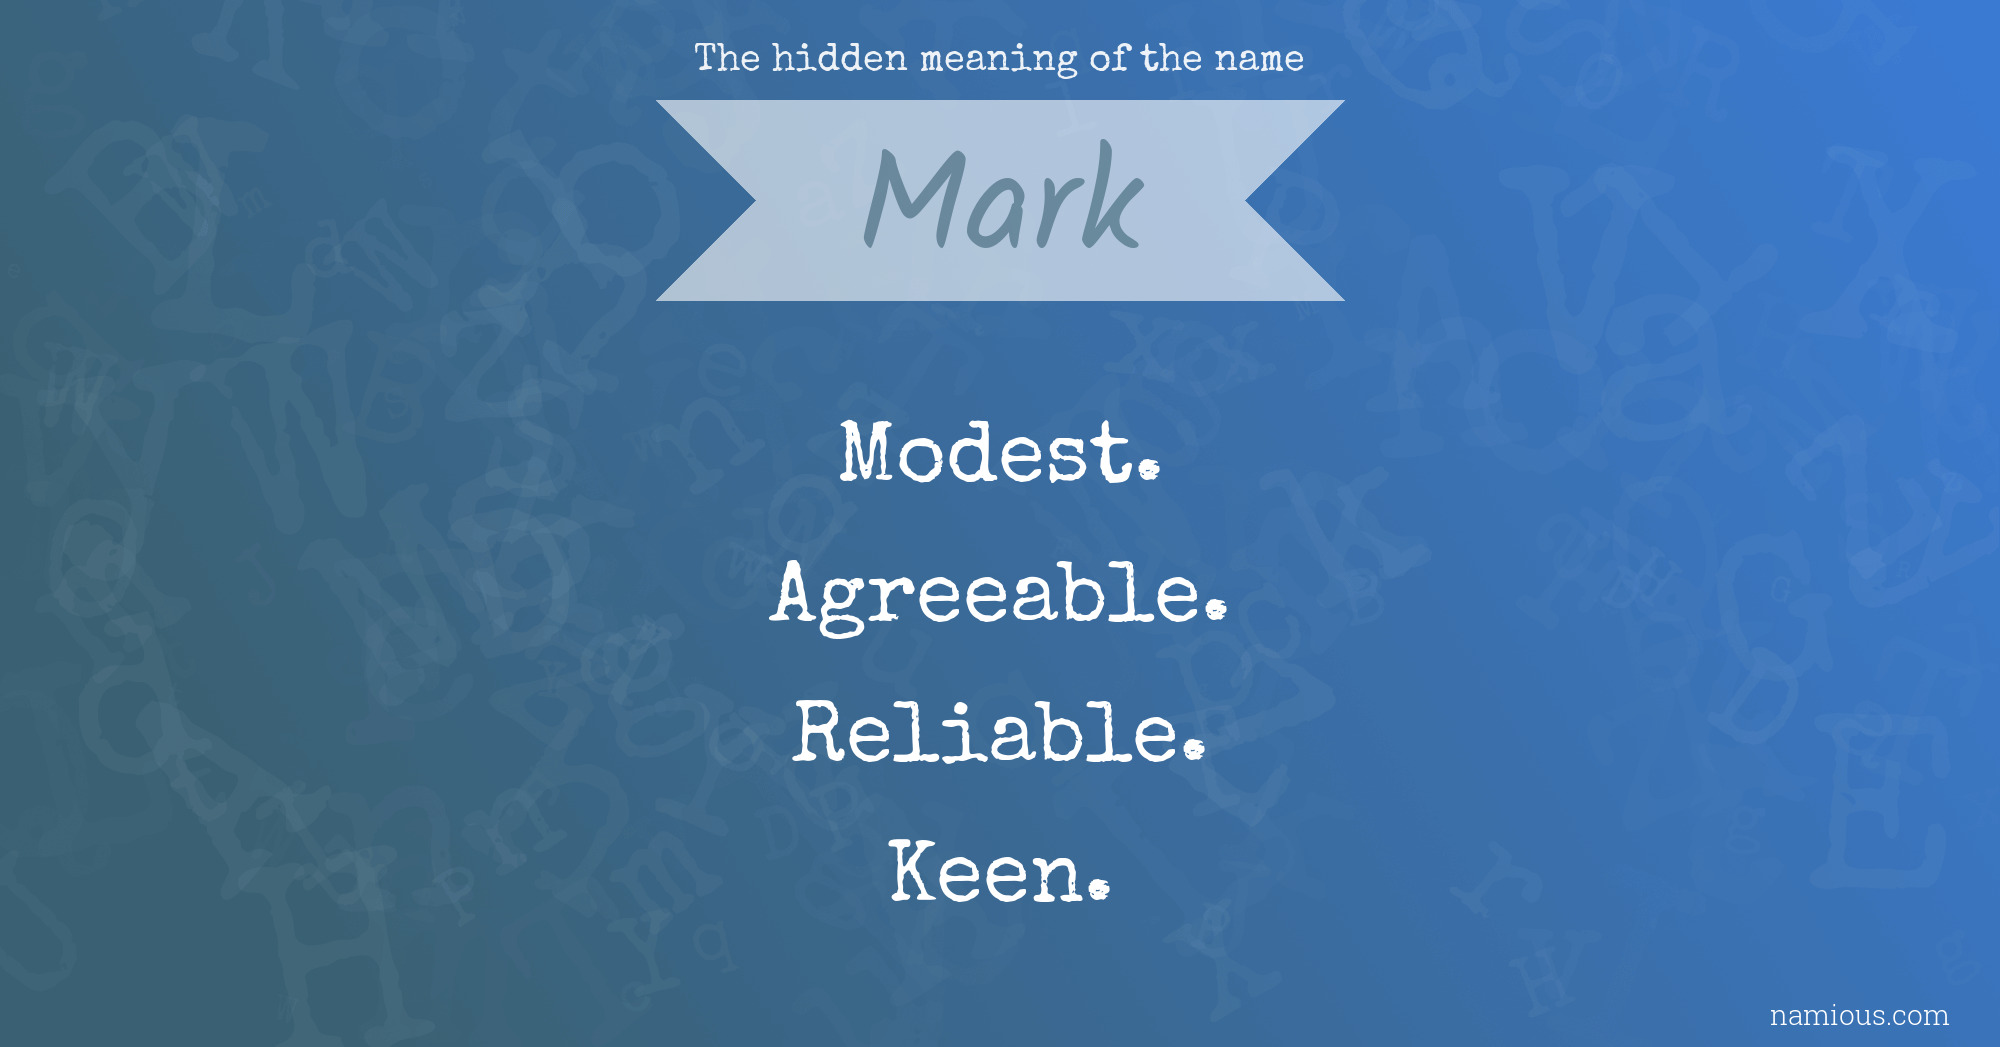 The hidden meaning of the name Mark